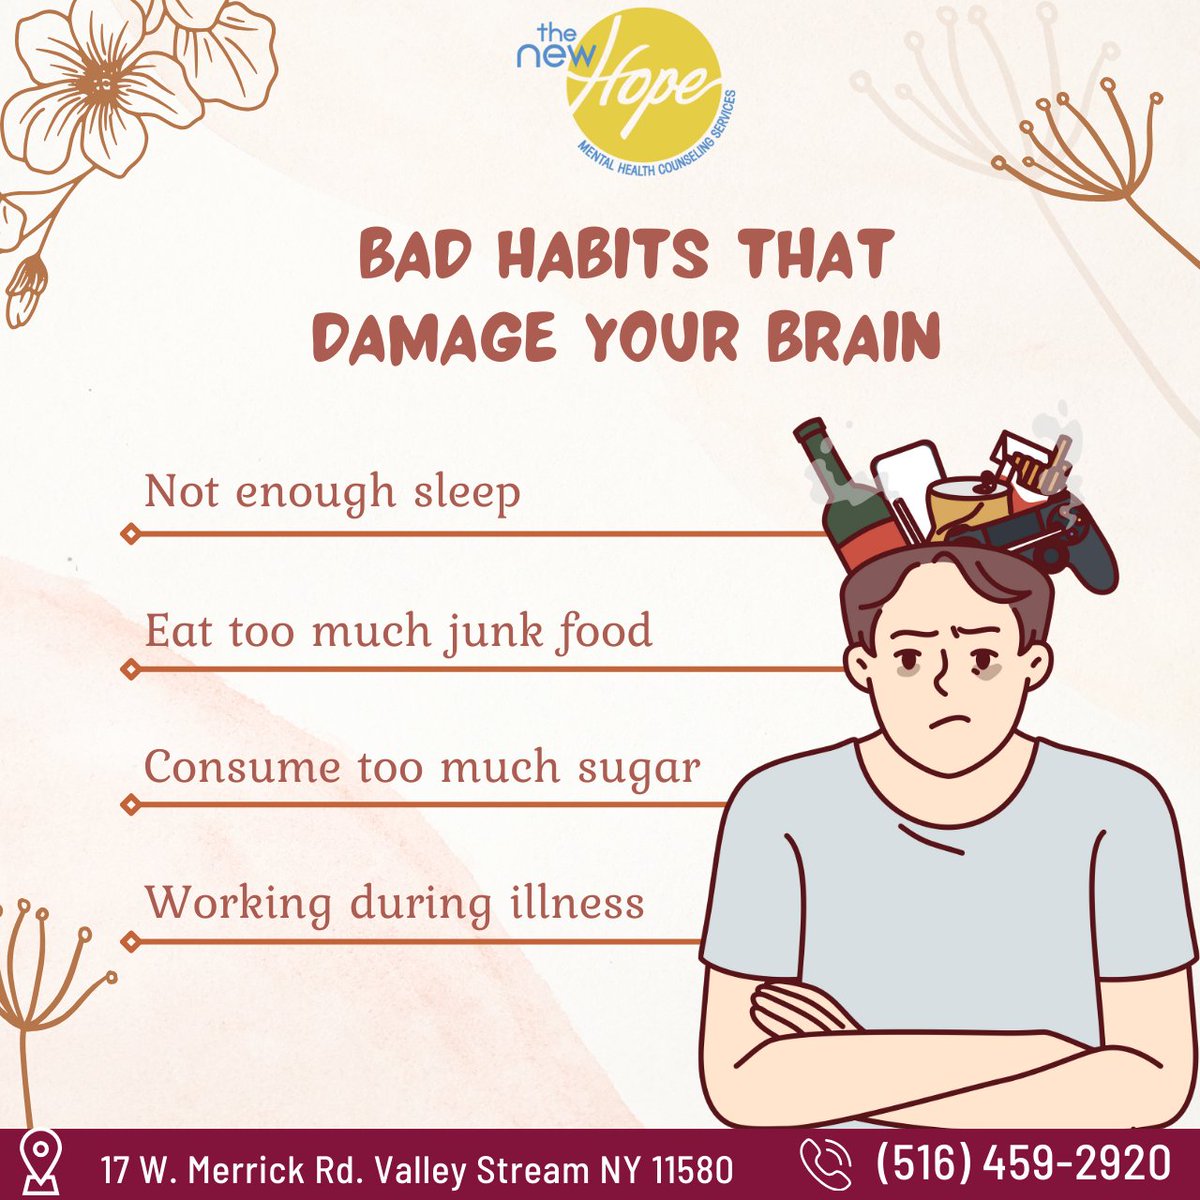 Mindful choices matter! 

#SelfCare #MindfulLiving #lowselfworth #insecurities #mentalmealthtips #mentalhealth #mentalhealthservices #mentalhealthhelp #Thenewhopemhcs #mentalhealthprofessionals  #MentalWellness #mentalhealthcounseling #mentalhealththerapist #mentalhealthcounselor